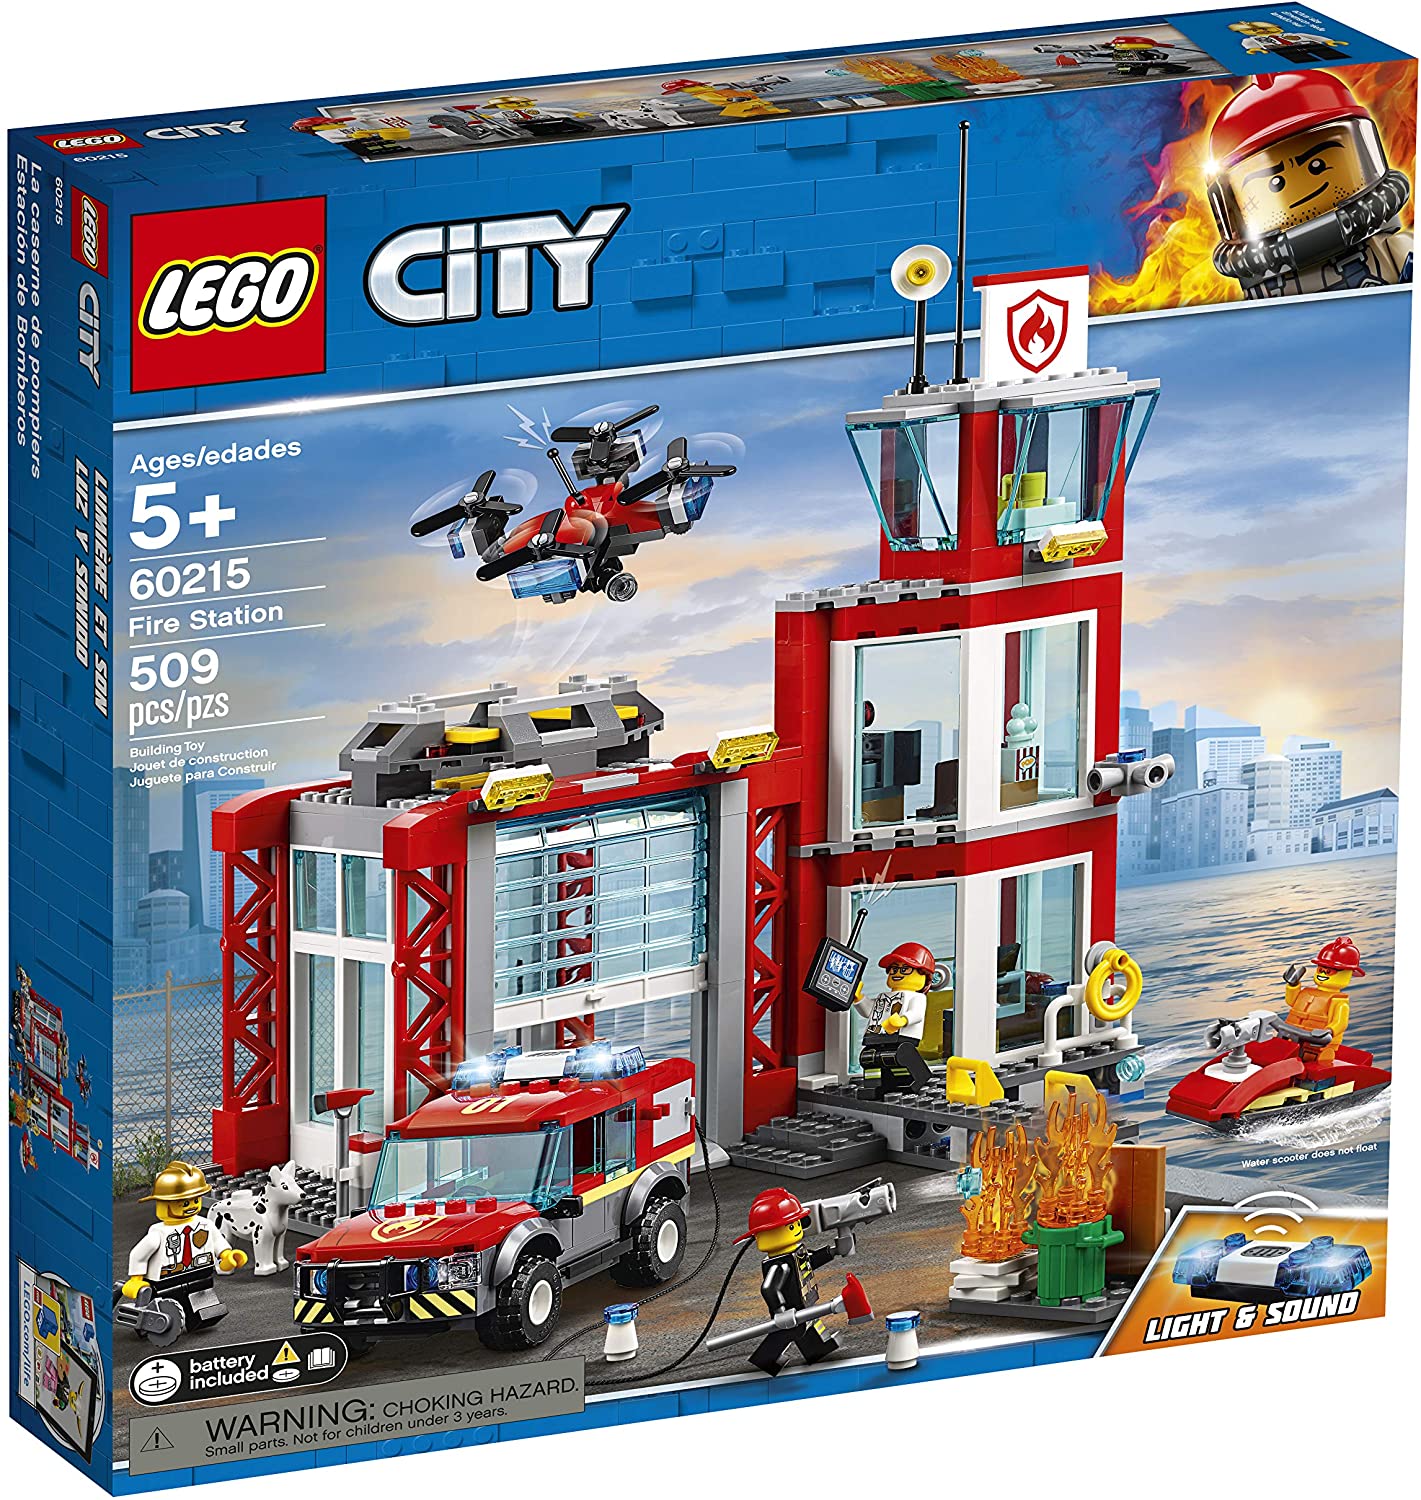 BRAND NEW SEALED LEGO 60215 City Fire Station  Playset with  Light and Sound 